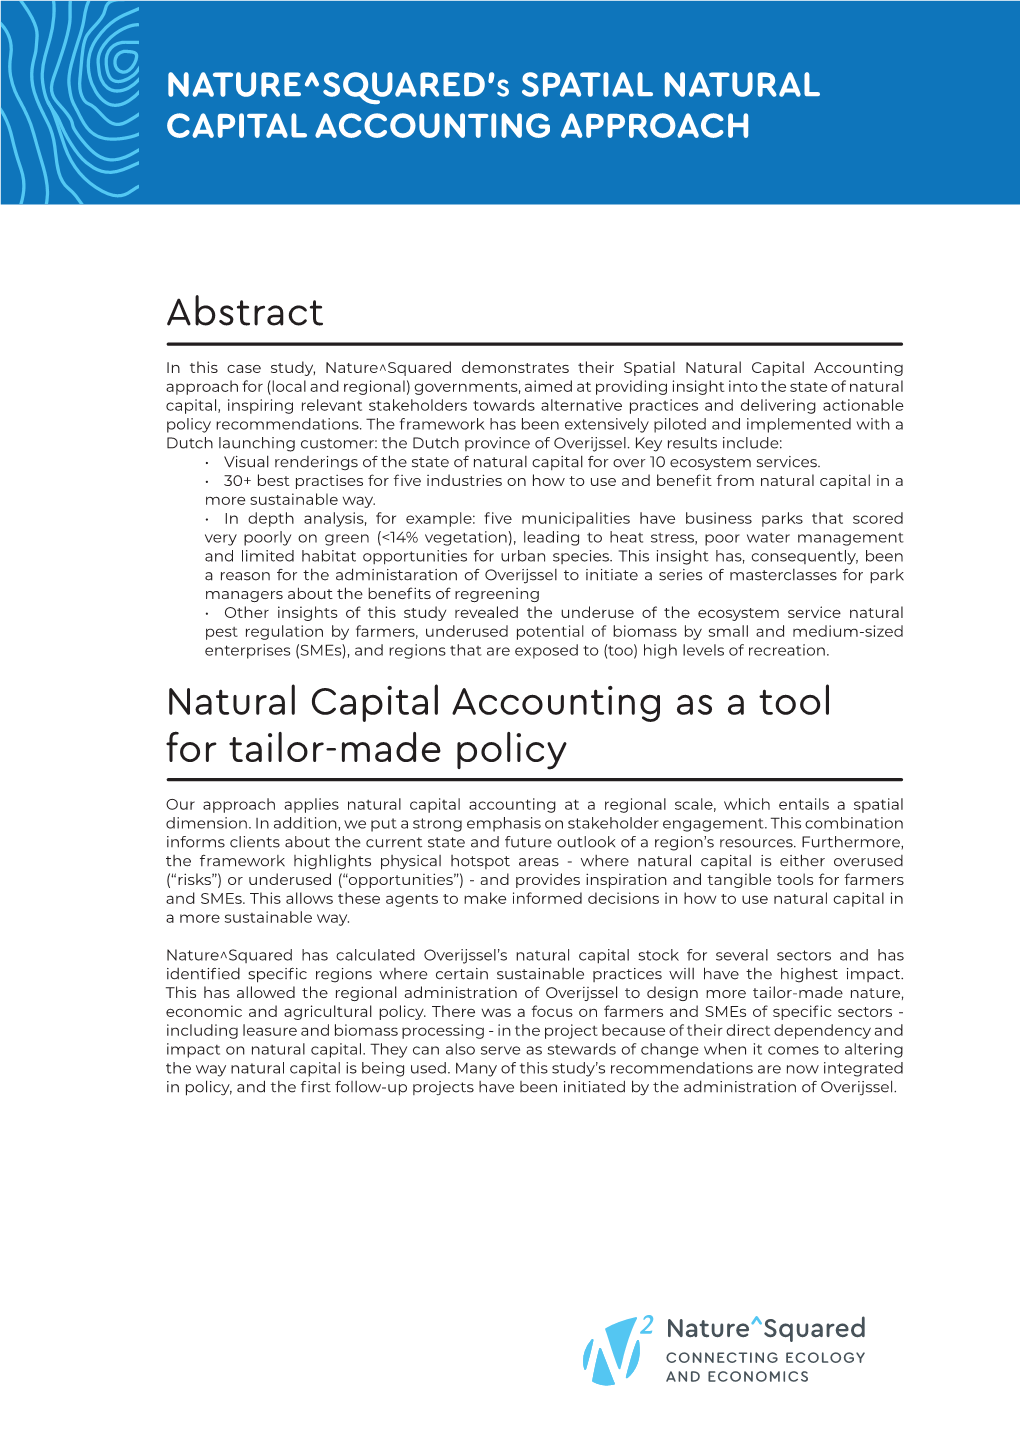 Natural Capital Accounting Approach